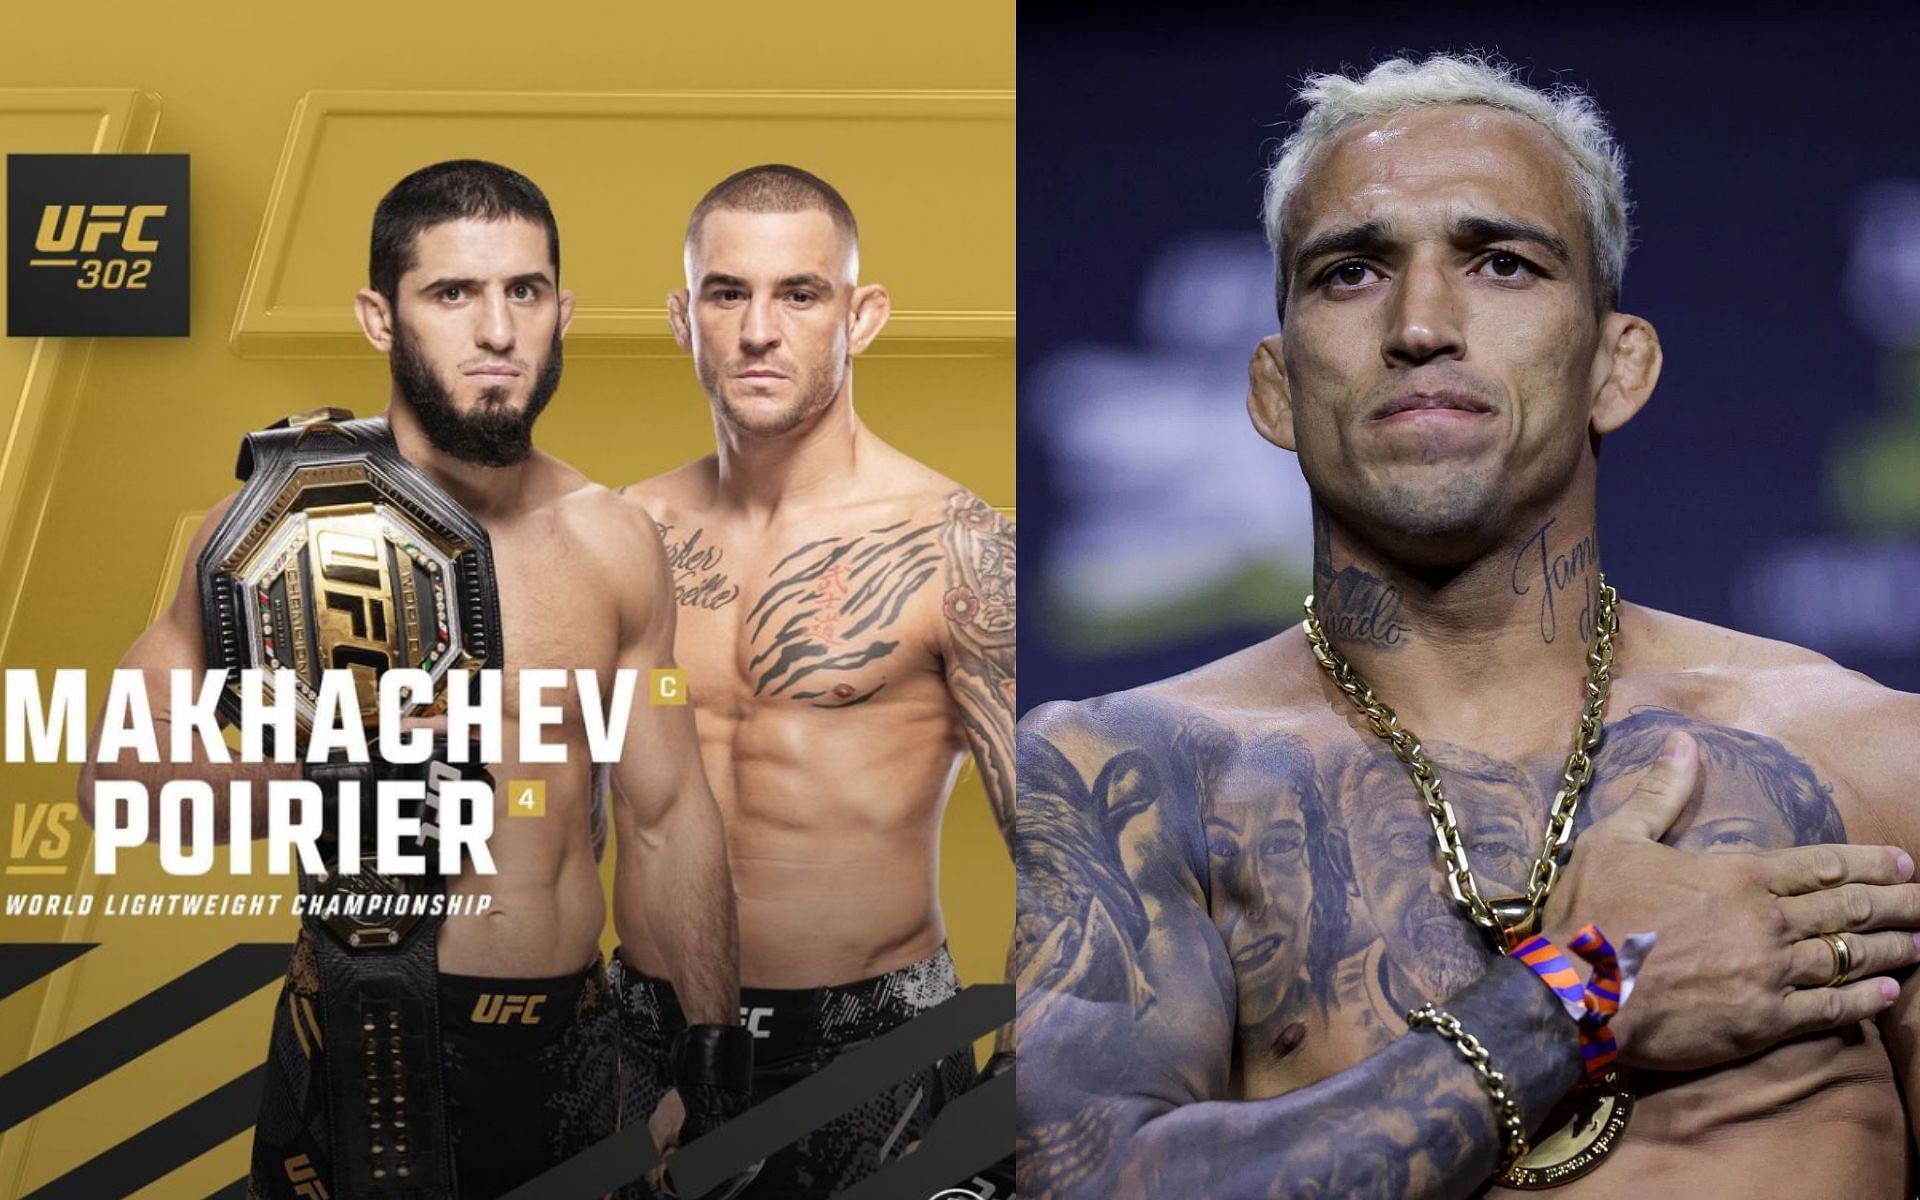 Islam Makhachev vs. Dustin Poirier (left) broken down by Charles Oliveira (right) [Images Courtesy: @GettyImages, @ufc on Instagram]